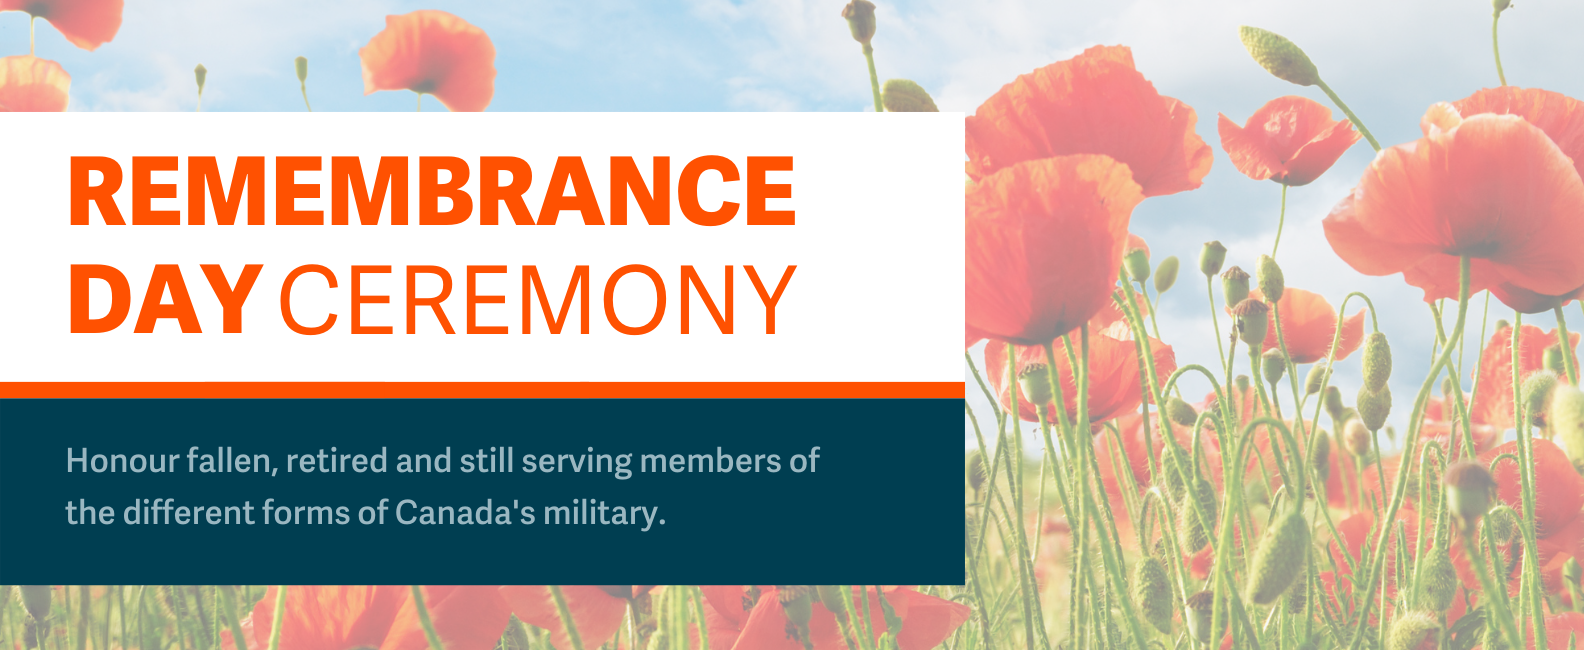 2021 Remembrance Day Ceremony